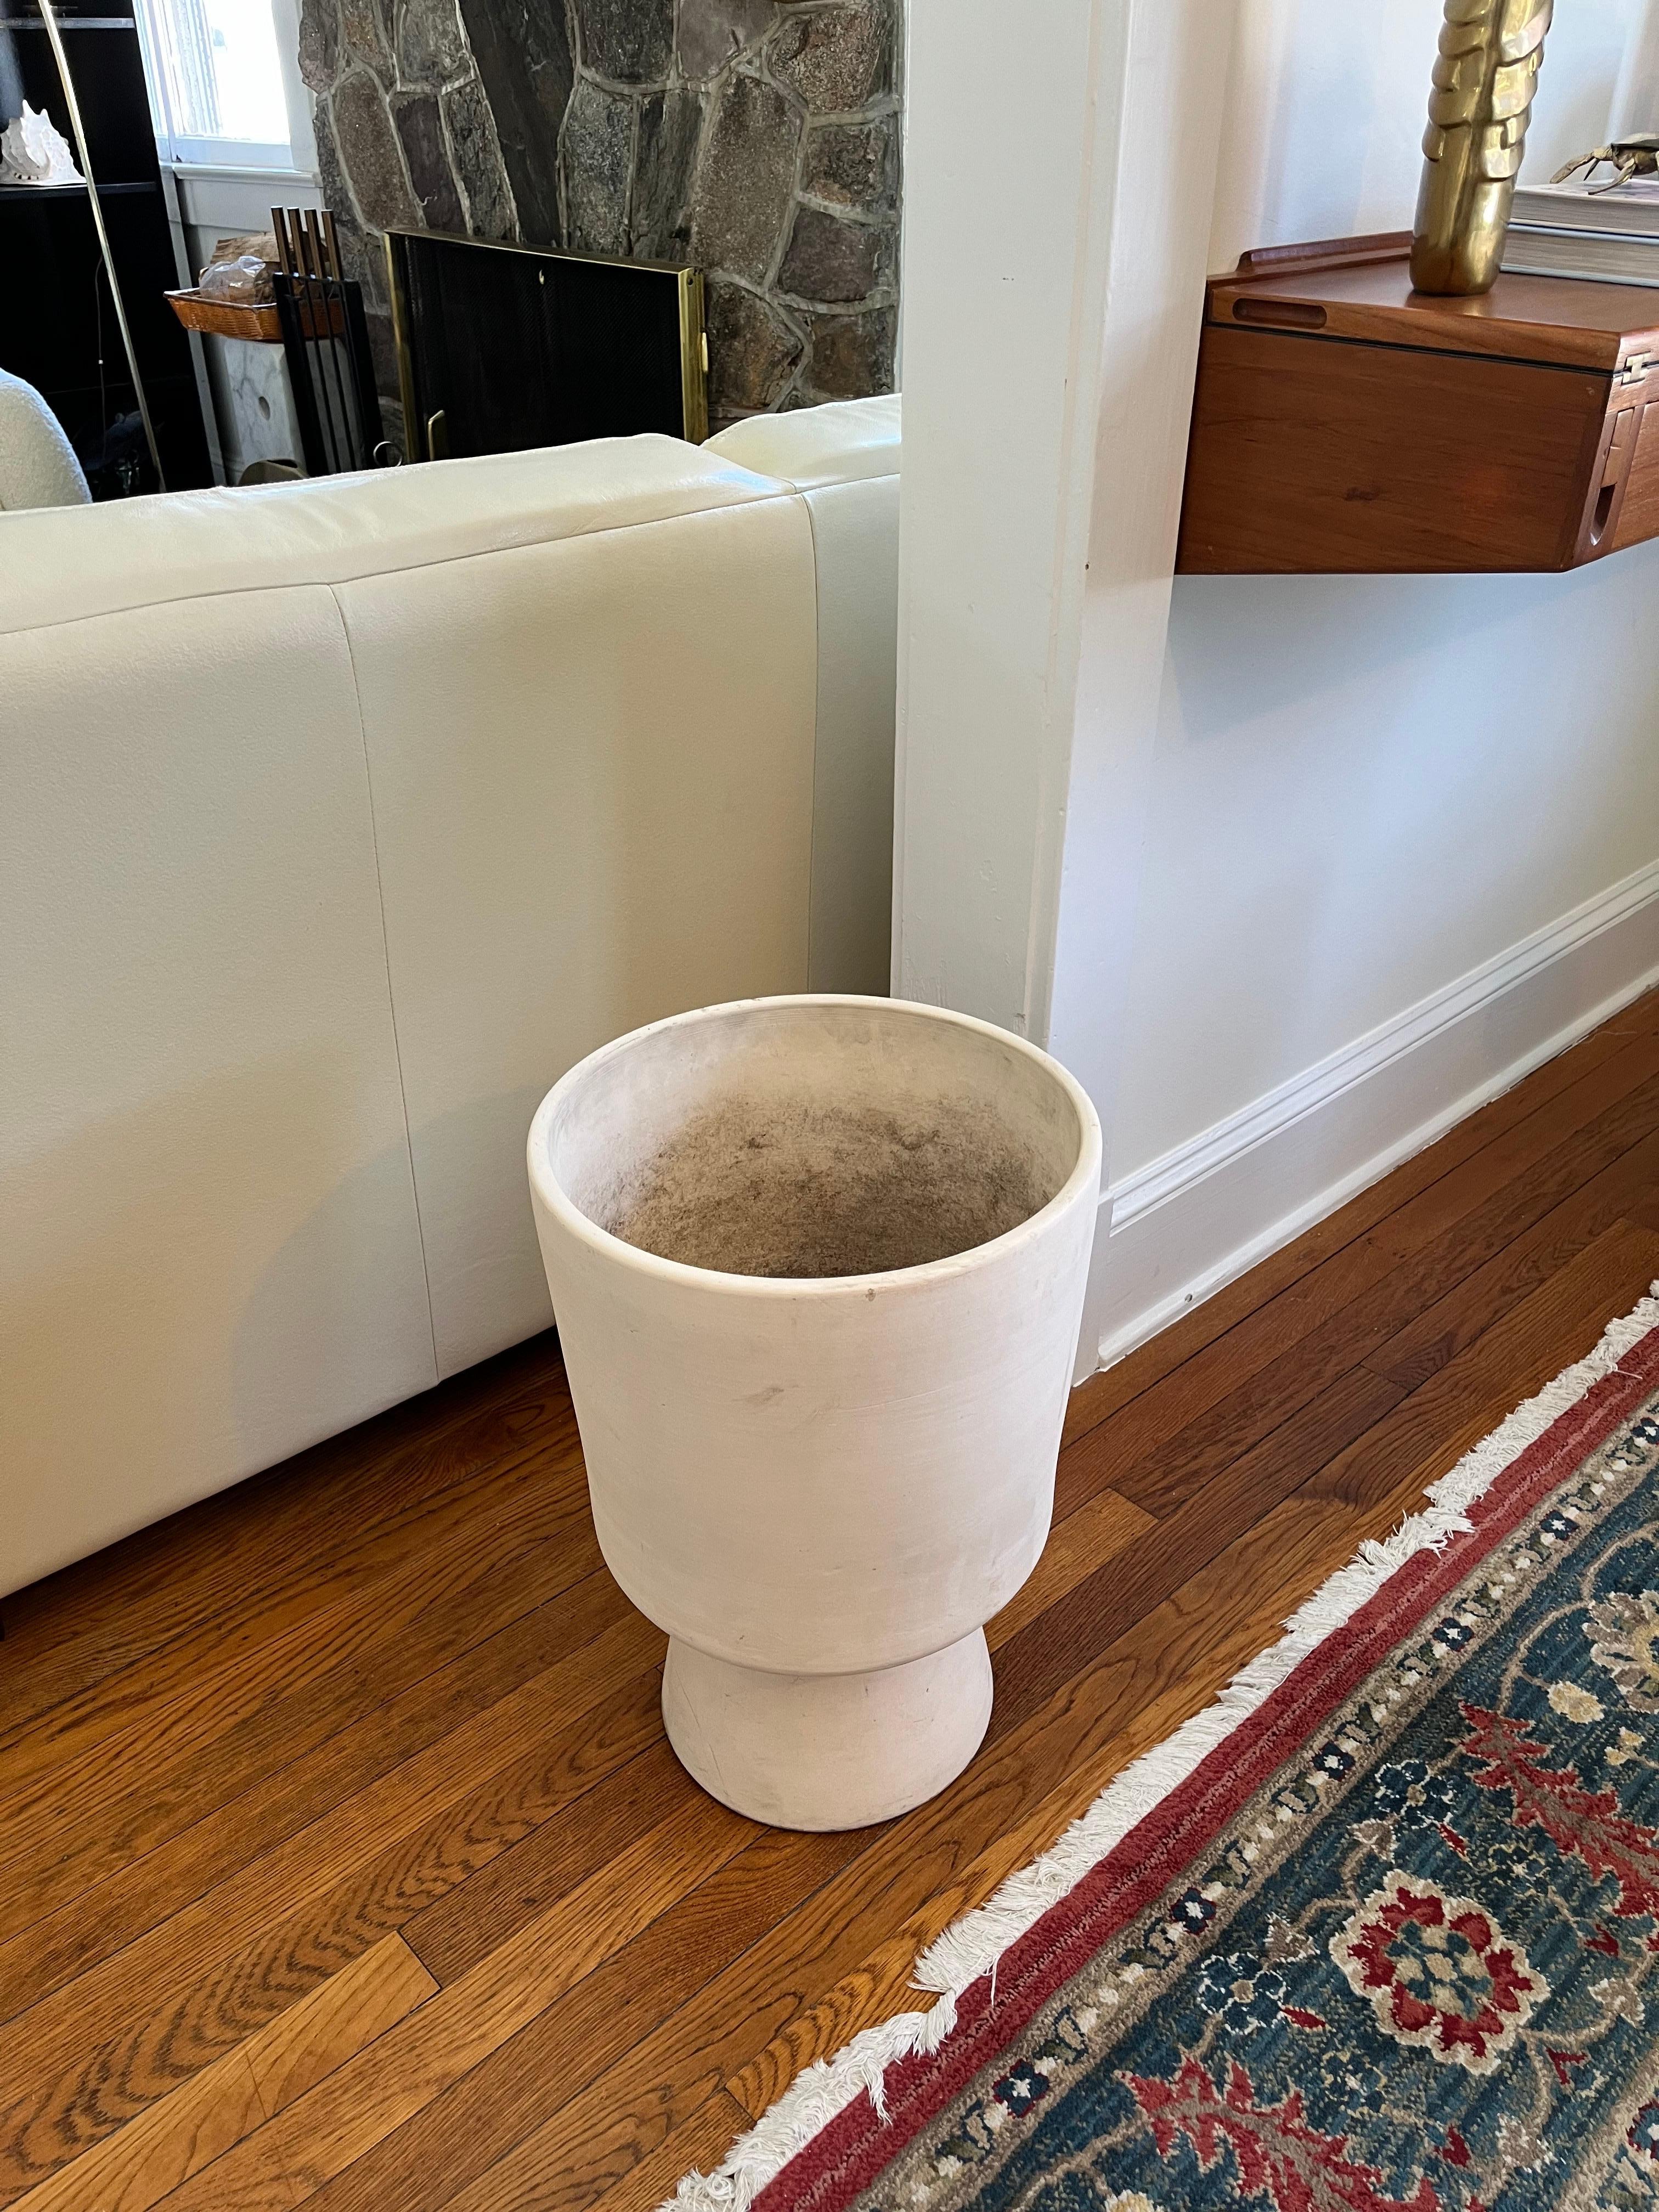 Large unglazed planter designed by Malcolm Leland for the Southern California company Architectural Pottery circa 1950s. The bisque finish was designed to let the water evaporate when the planter was used indoors. The Chalice form is wonderful